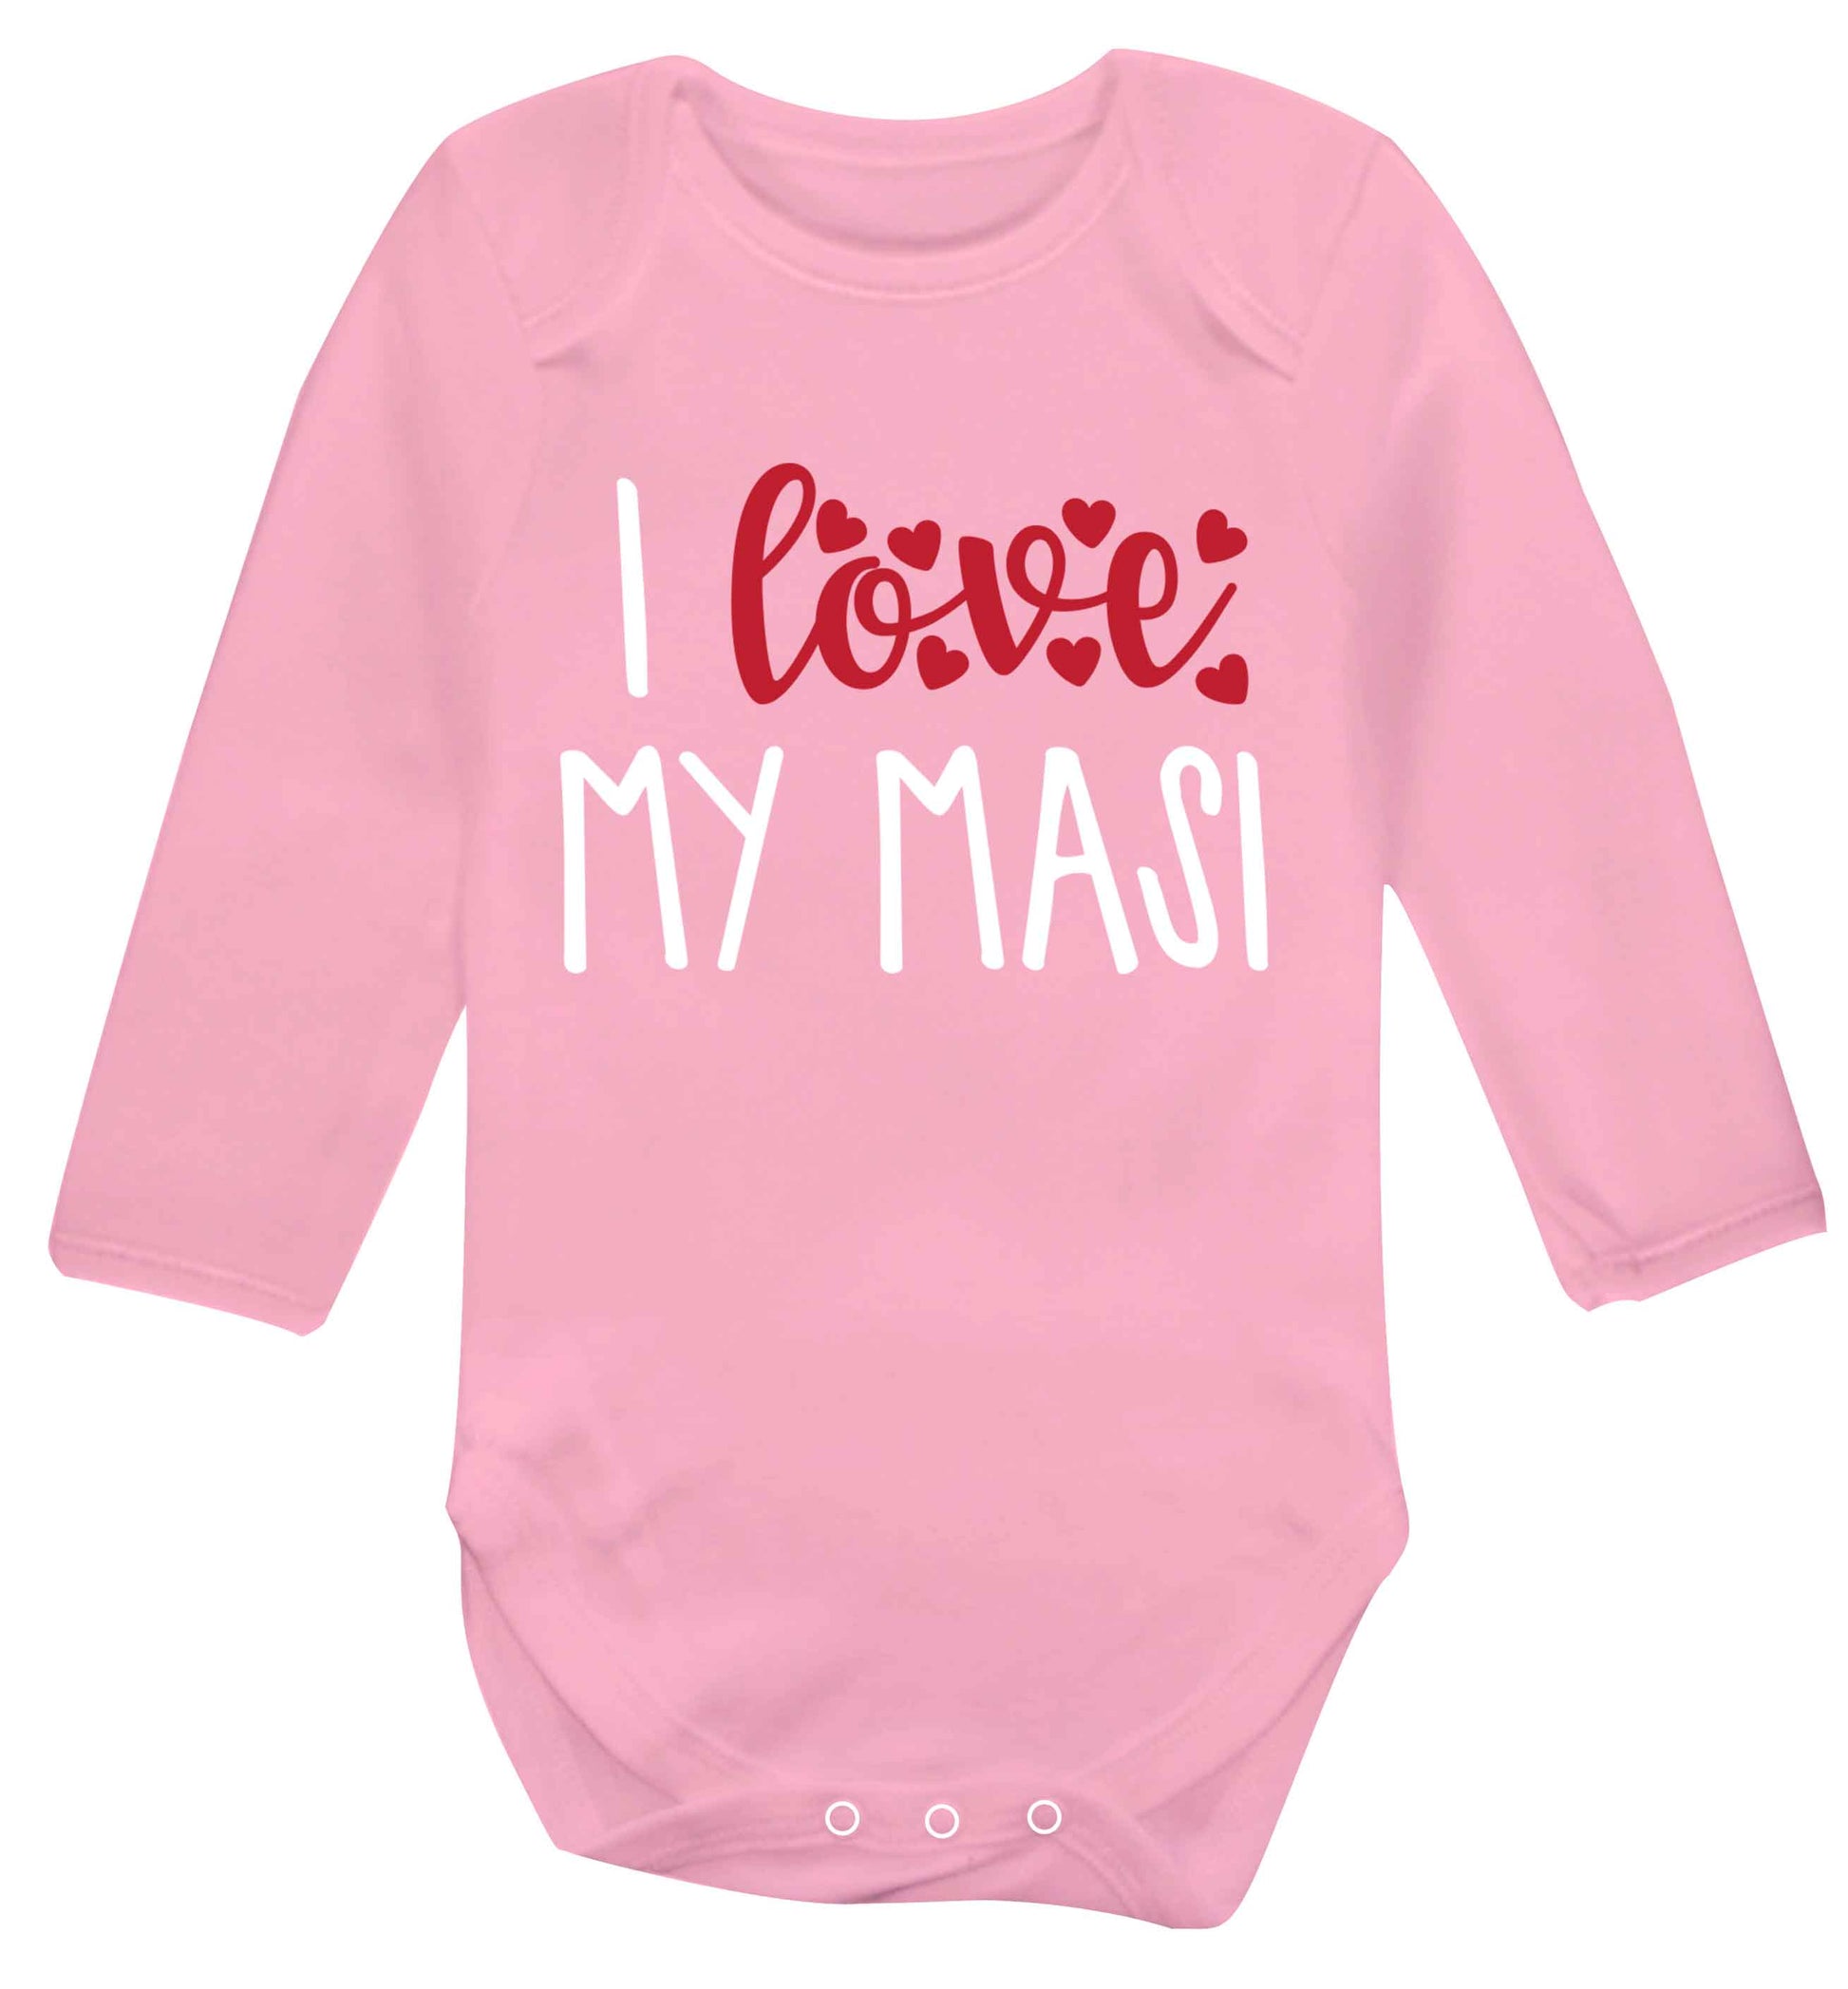 I love my masi Baby Vest long sleeved pale pink 6-12 months